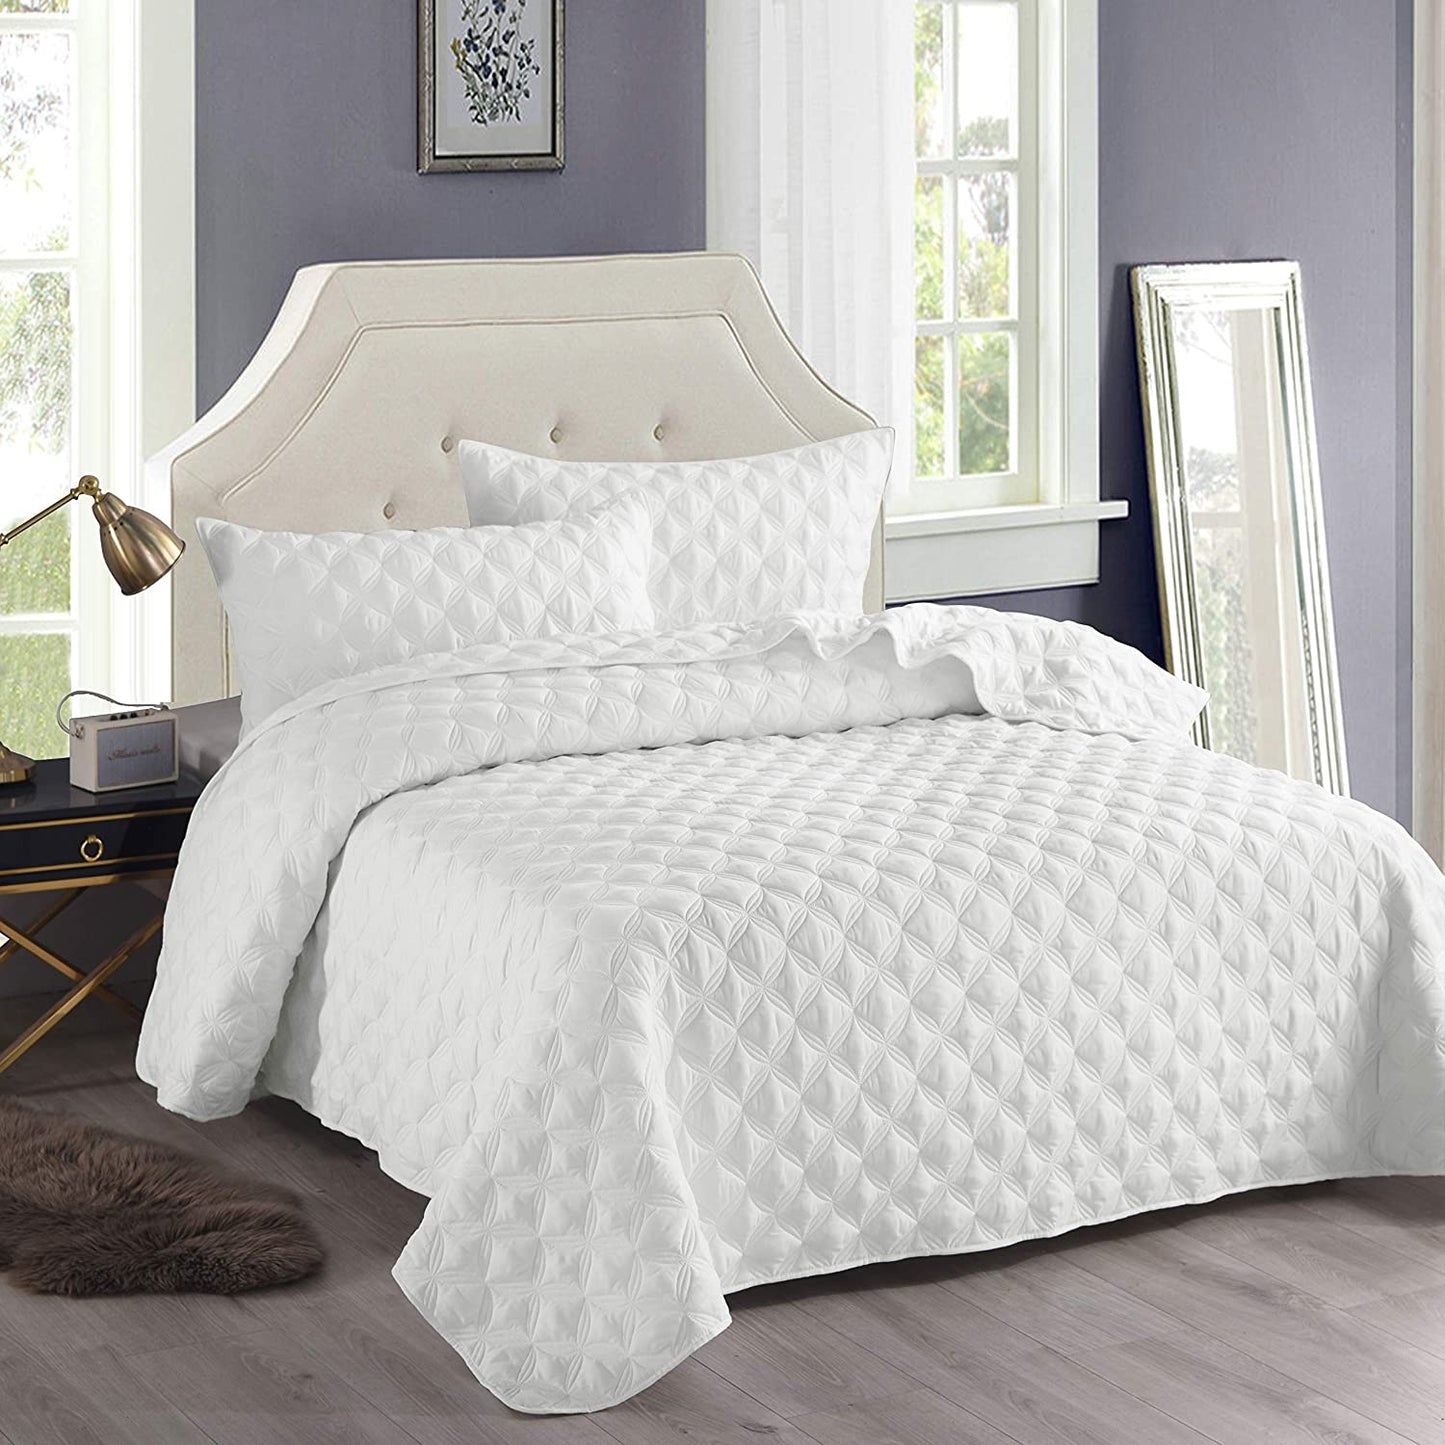 Exclusivo Mezcla 3-Piece King/Queen/Full/Twin Size Quilt Set with Pillow Shams, Ellispe Quilted Bedspread/Coverlet/Bed Cover -Soft, Lightweight and Reversible